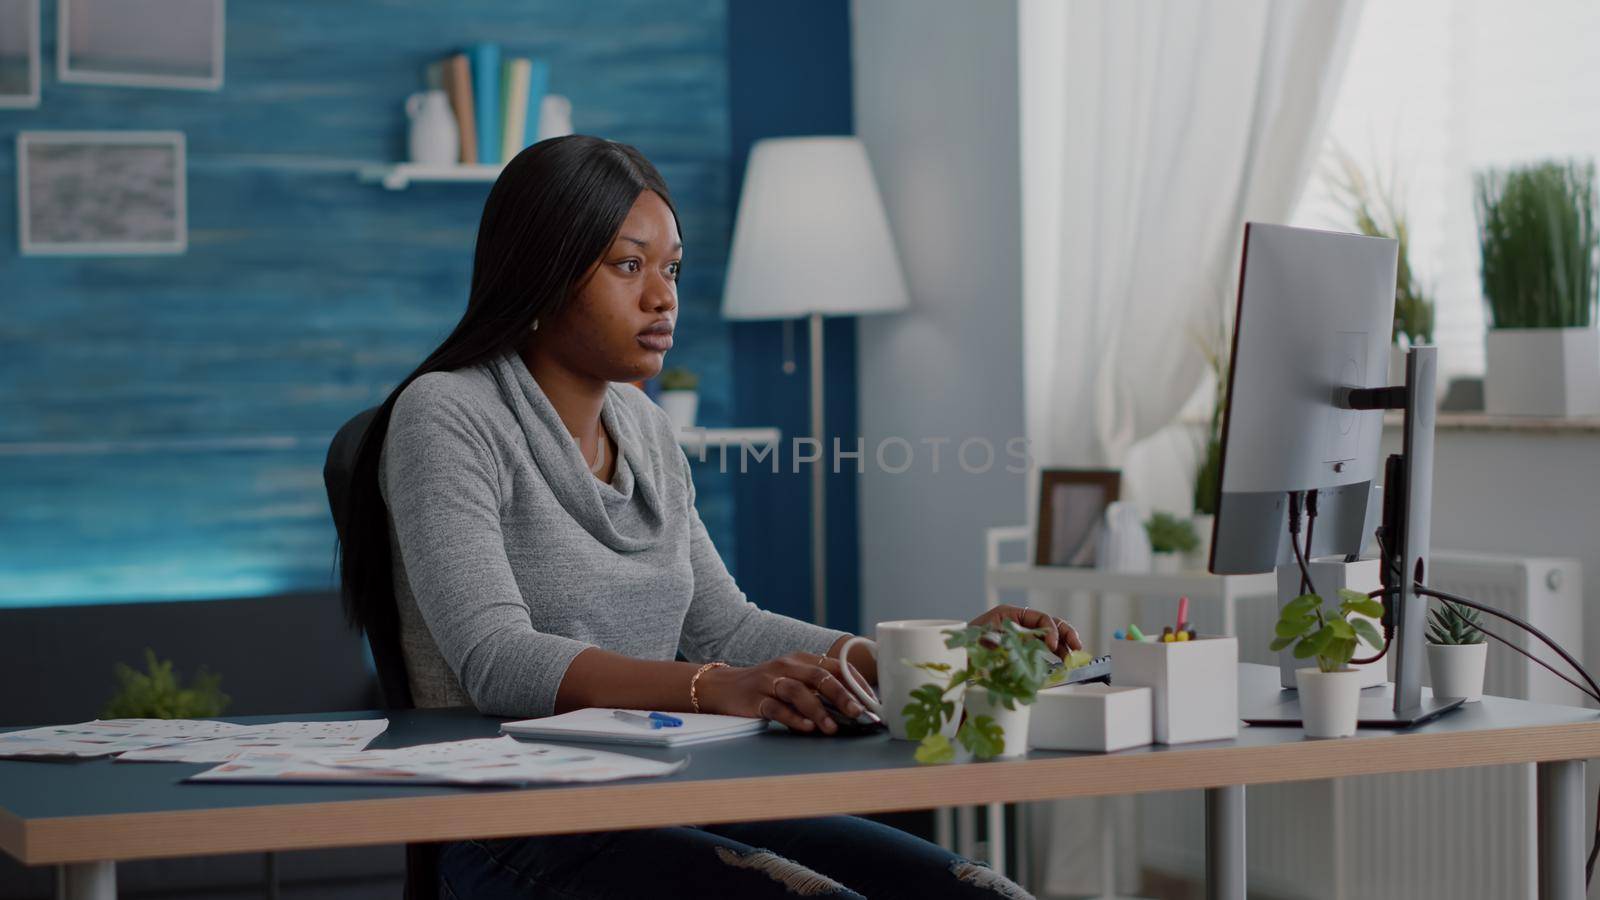 African american student with dark skin working remote from home at marketing online by DCStudio